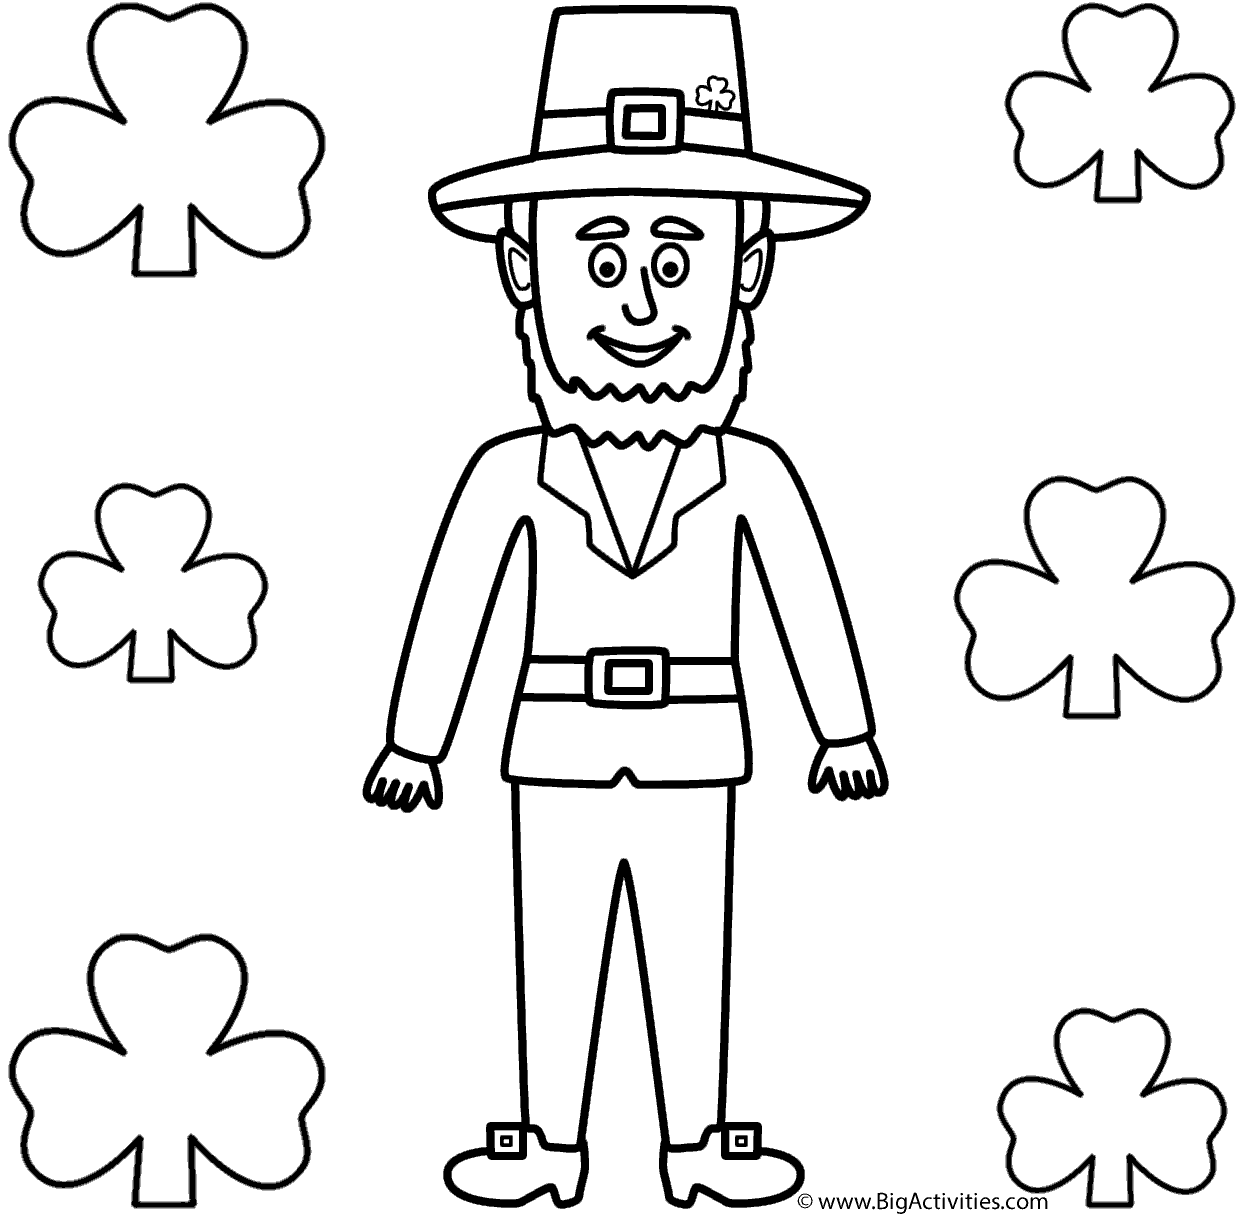 Leprechaun with Shamrocks Coloring Page (St. Patrick's Day)